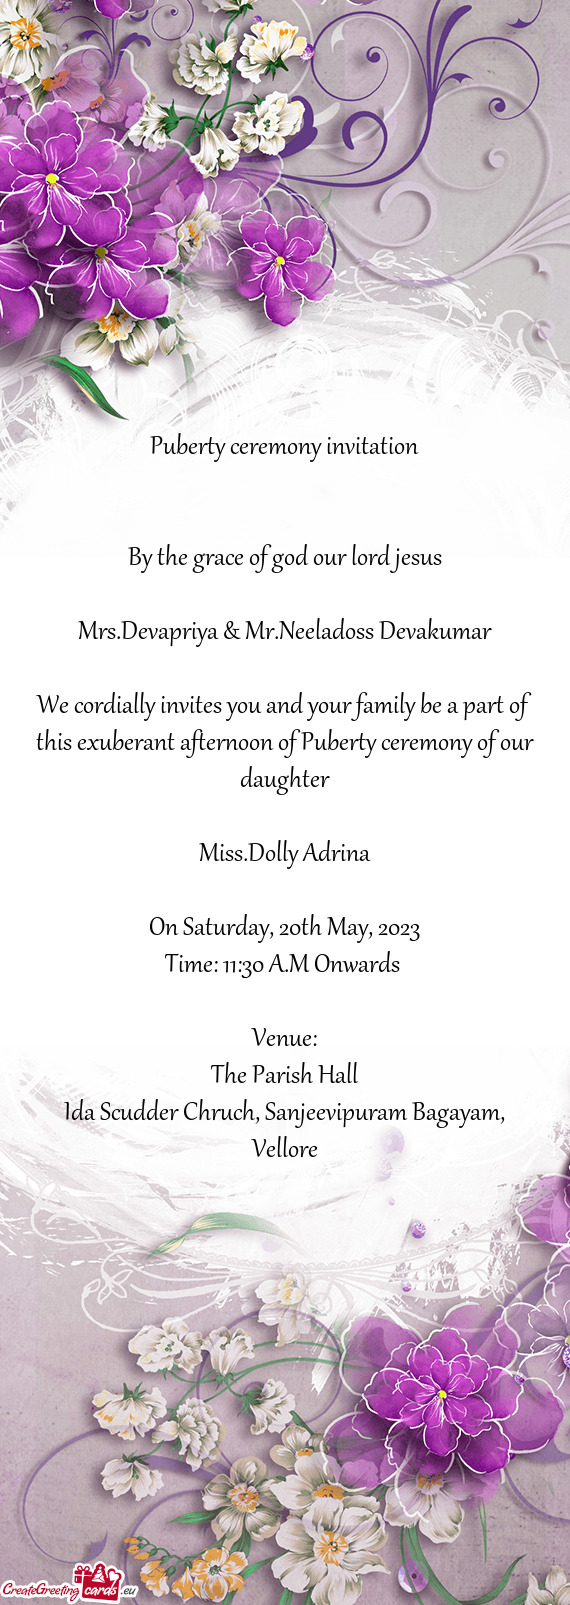 We cordially invites you and your family be a part of this exuberant afternoon of Puberty ceremony o